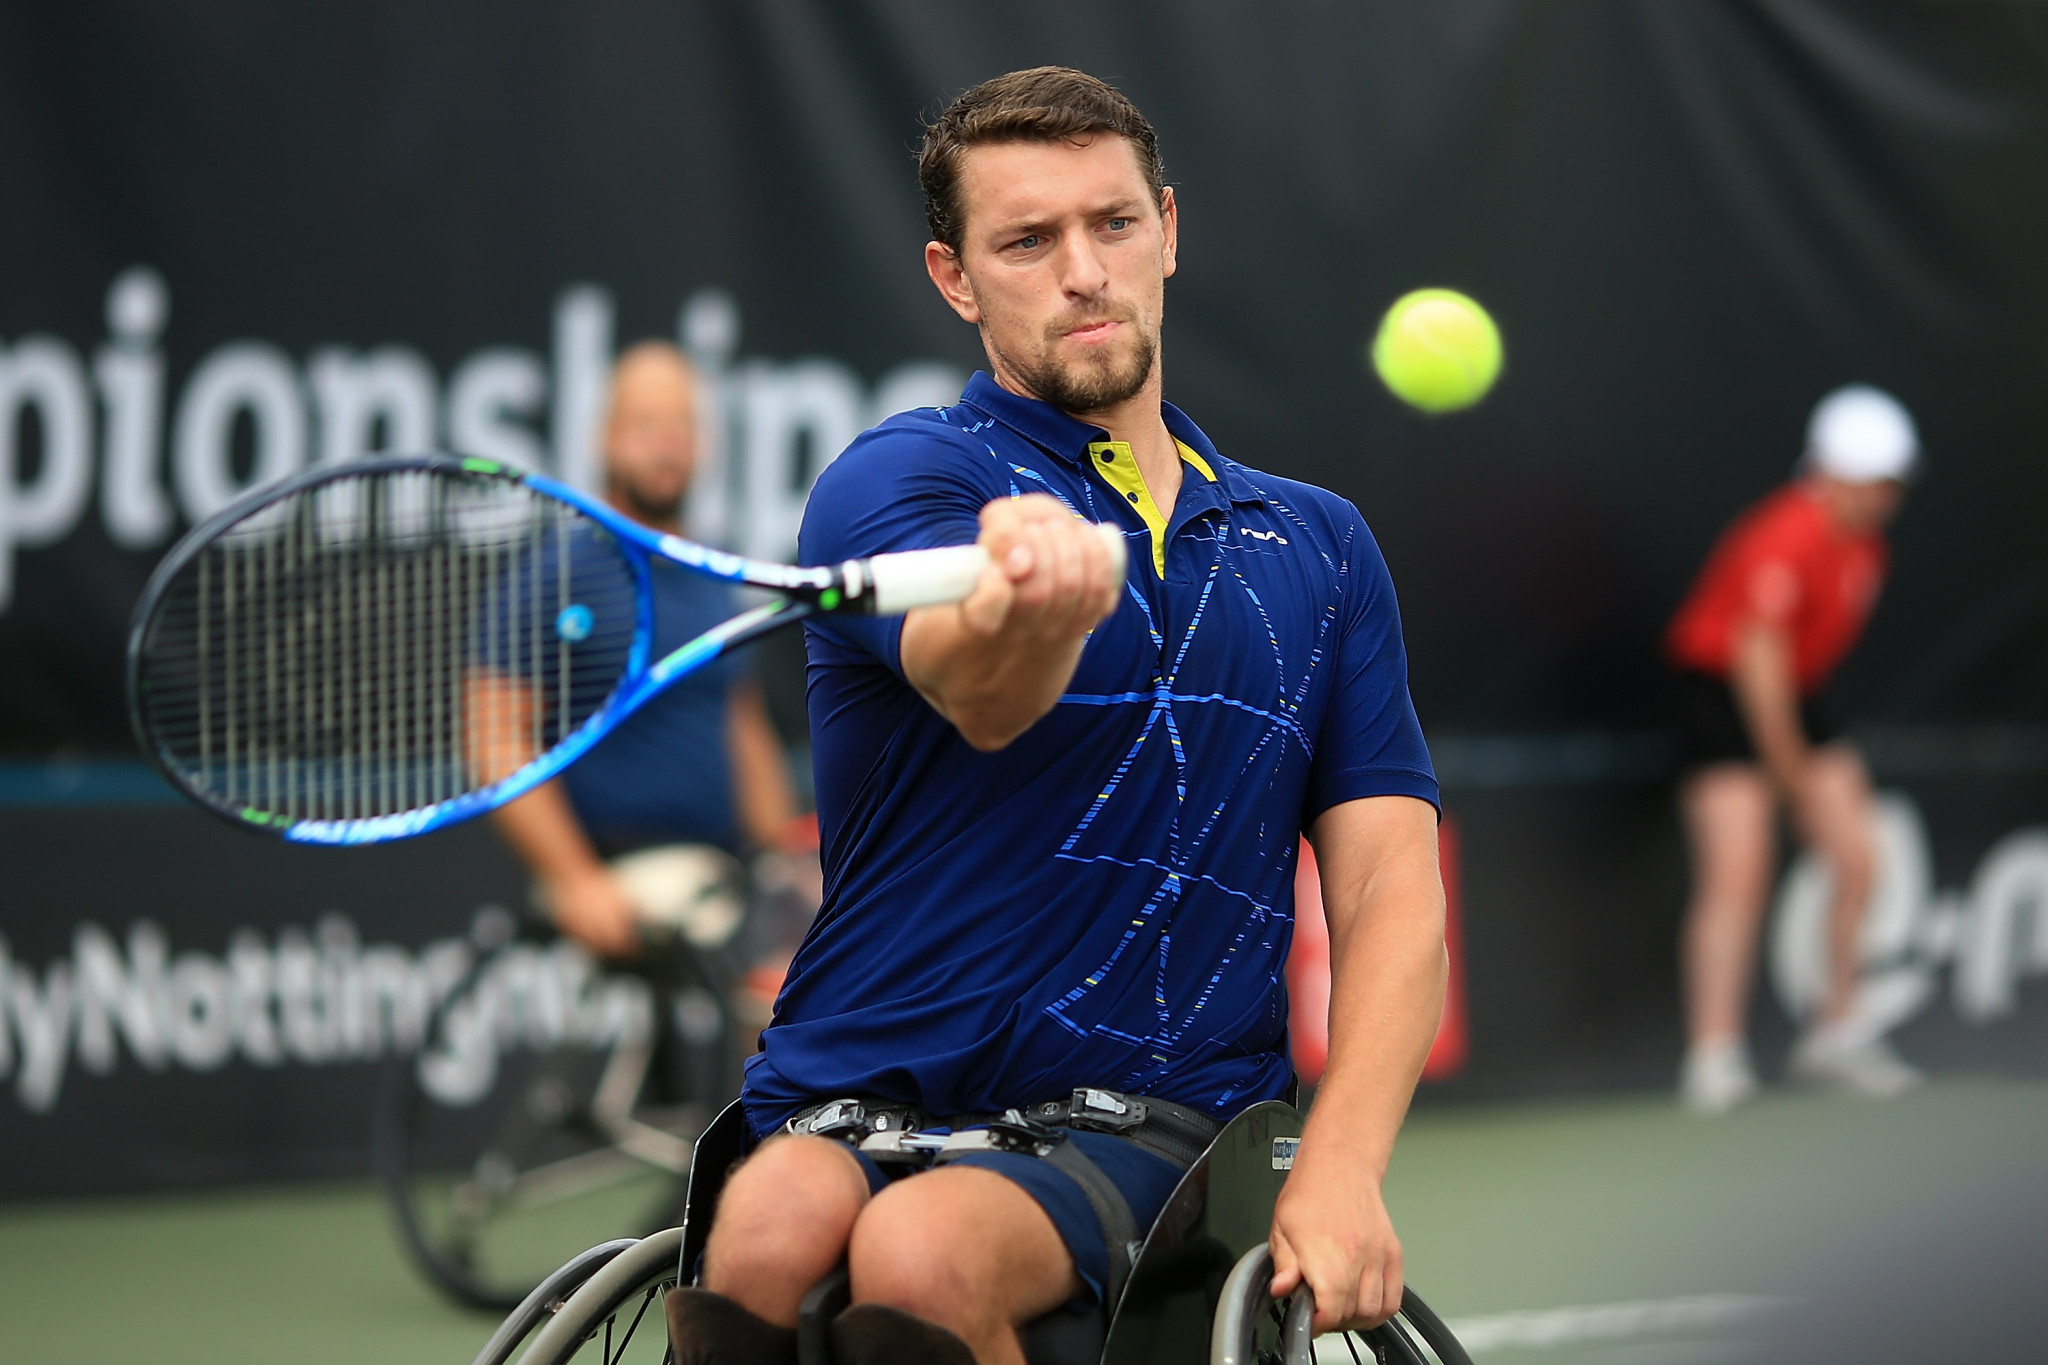 Home favourite through to quarter-finals at Belgian Open Wheelchair Tennis Championships